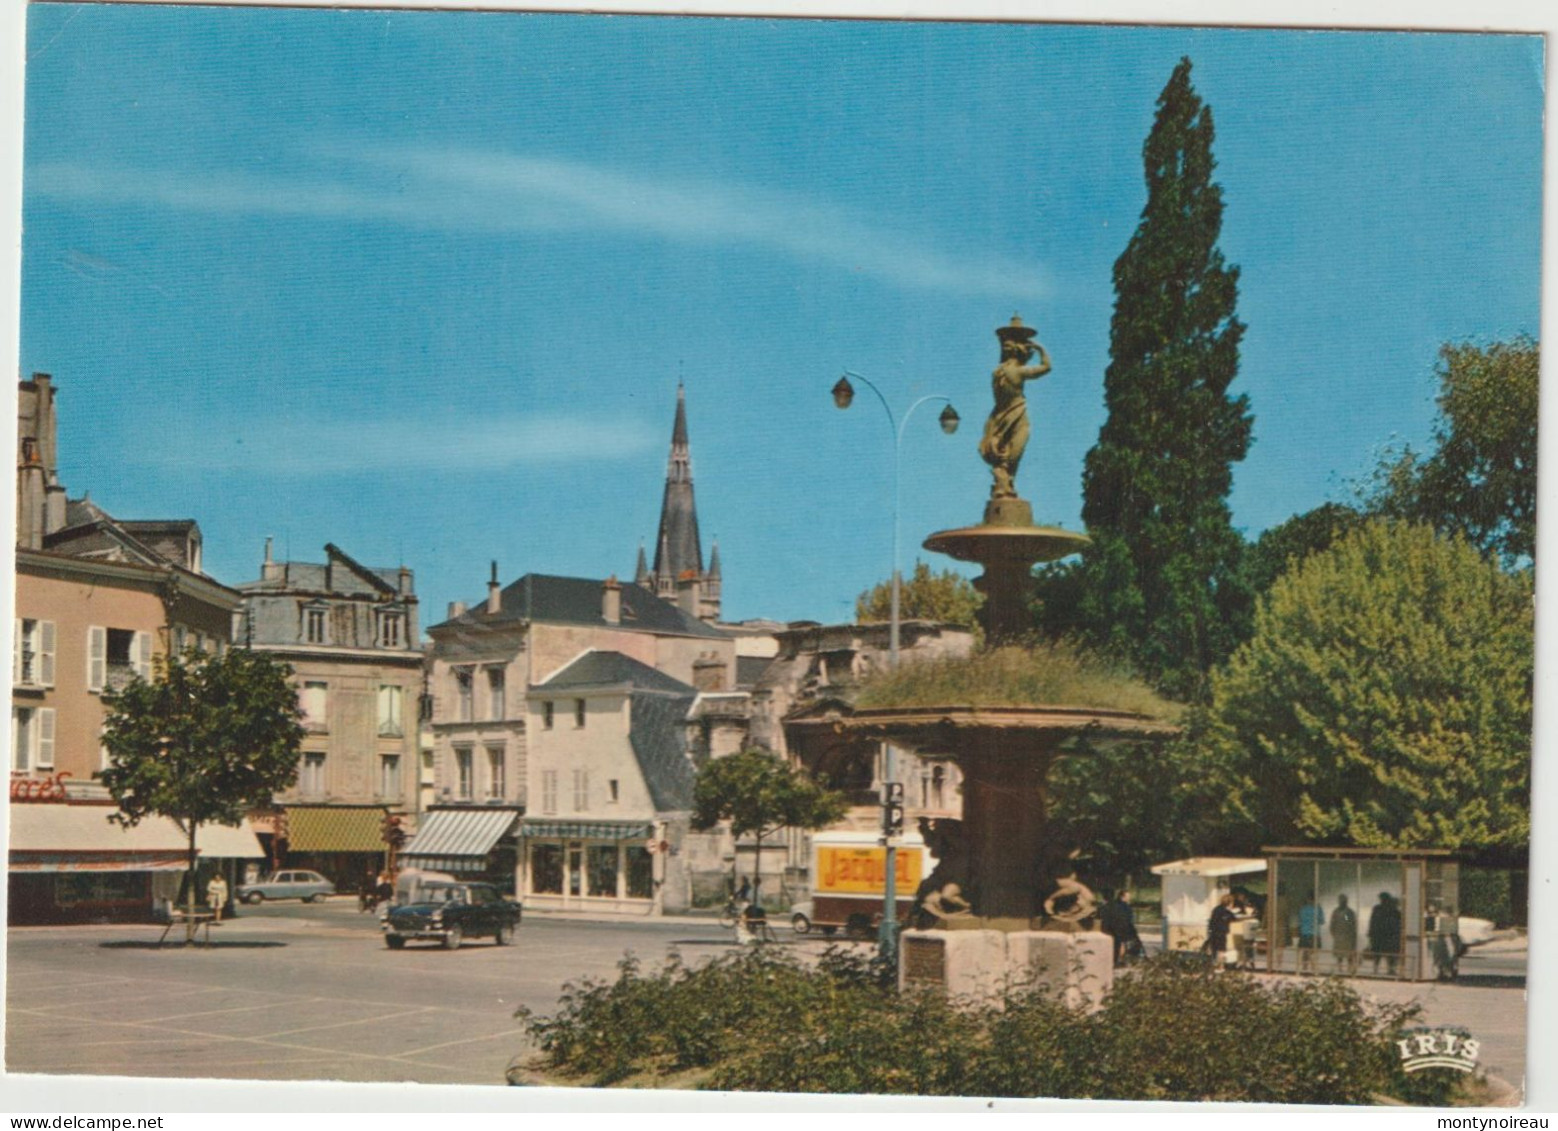 Marne :  EPERNAY : La  Place Hugues Plomb, Voiture Peugeot, Fontaine - Epernay